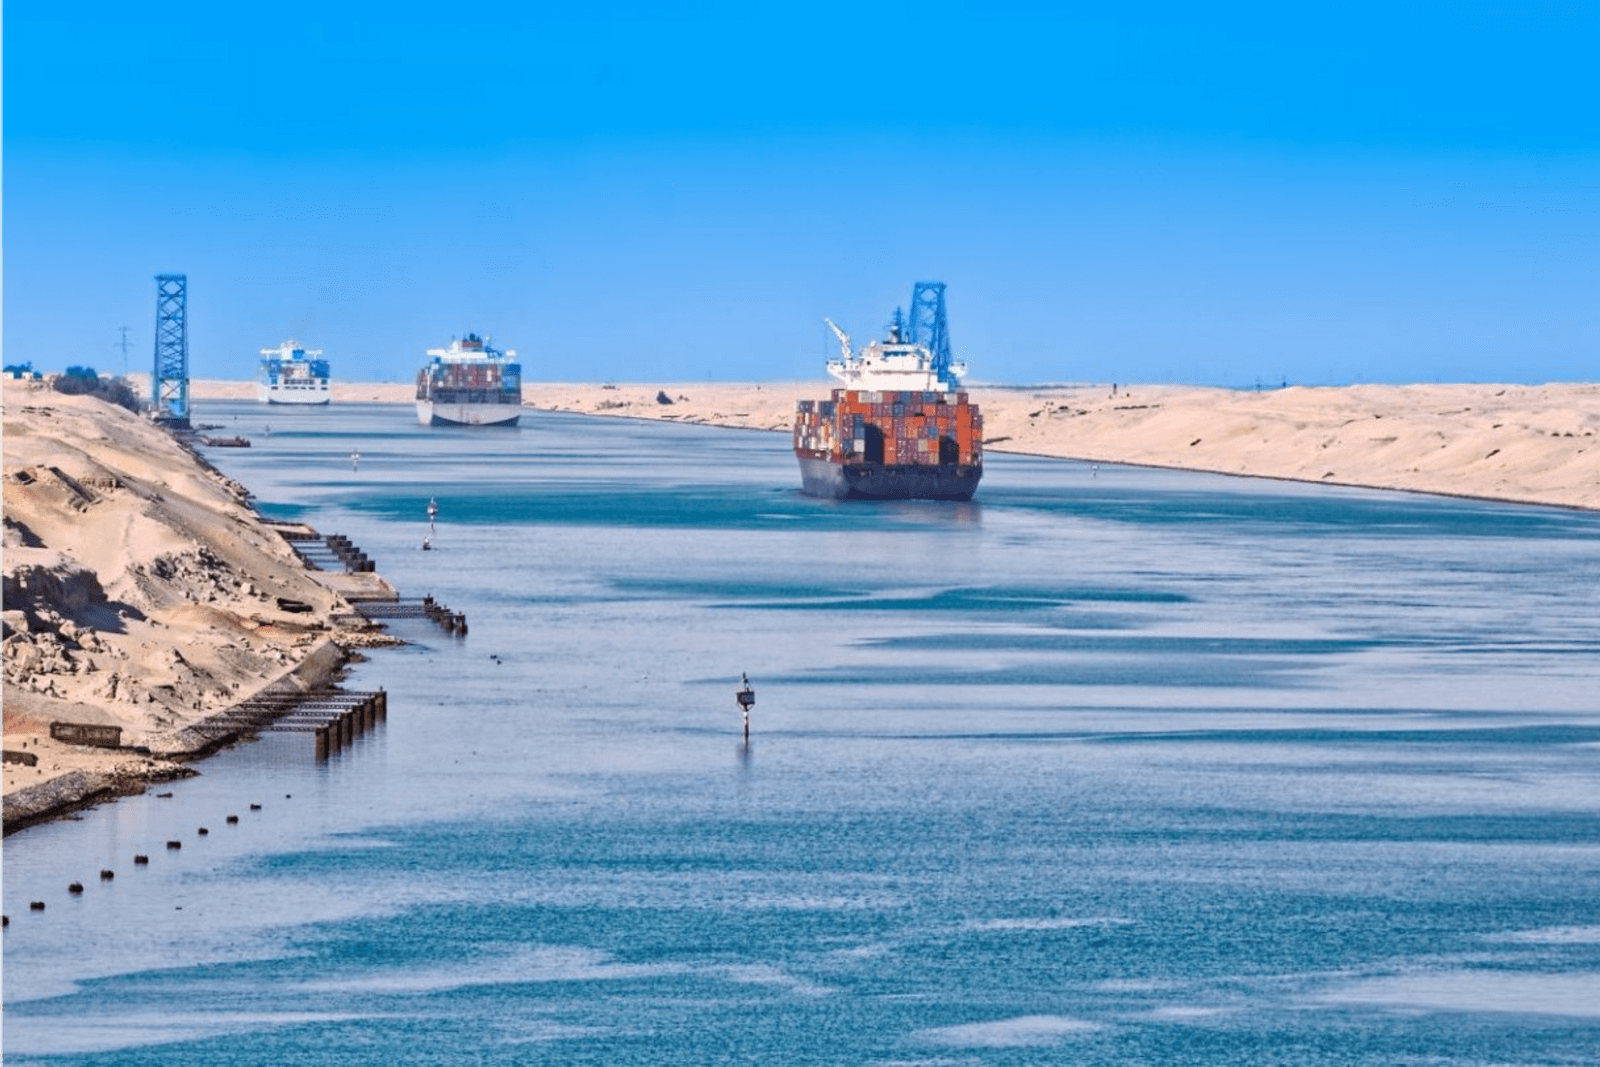 Suez Canal may expand southern channel, chairman says